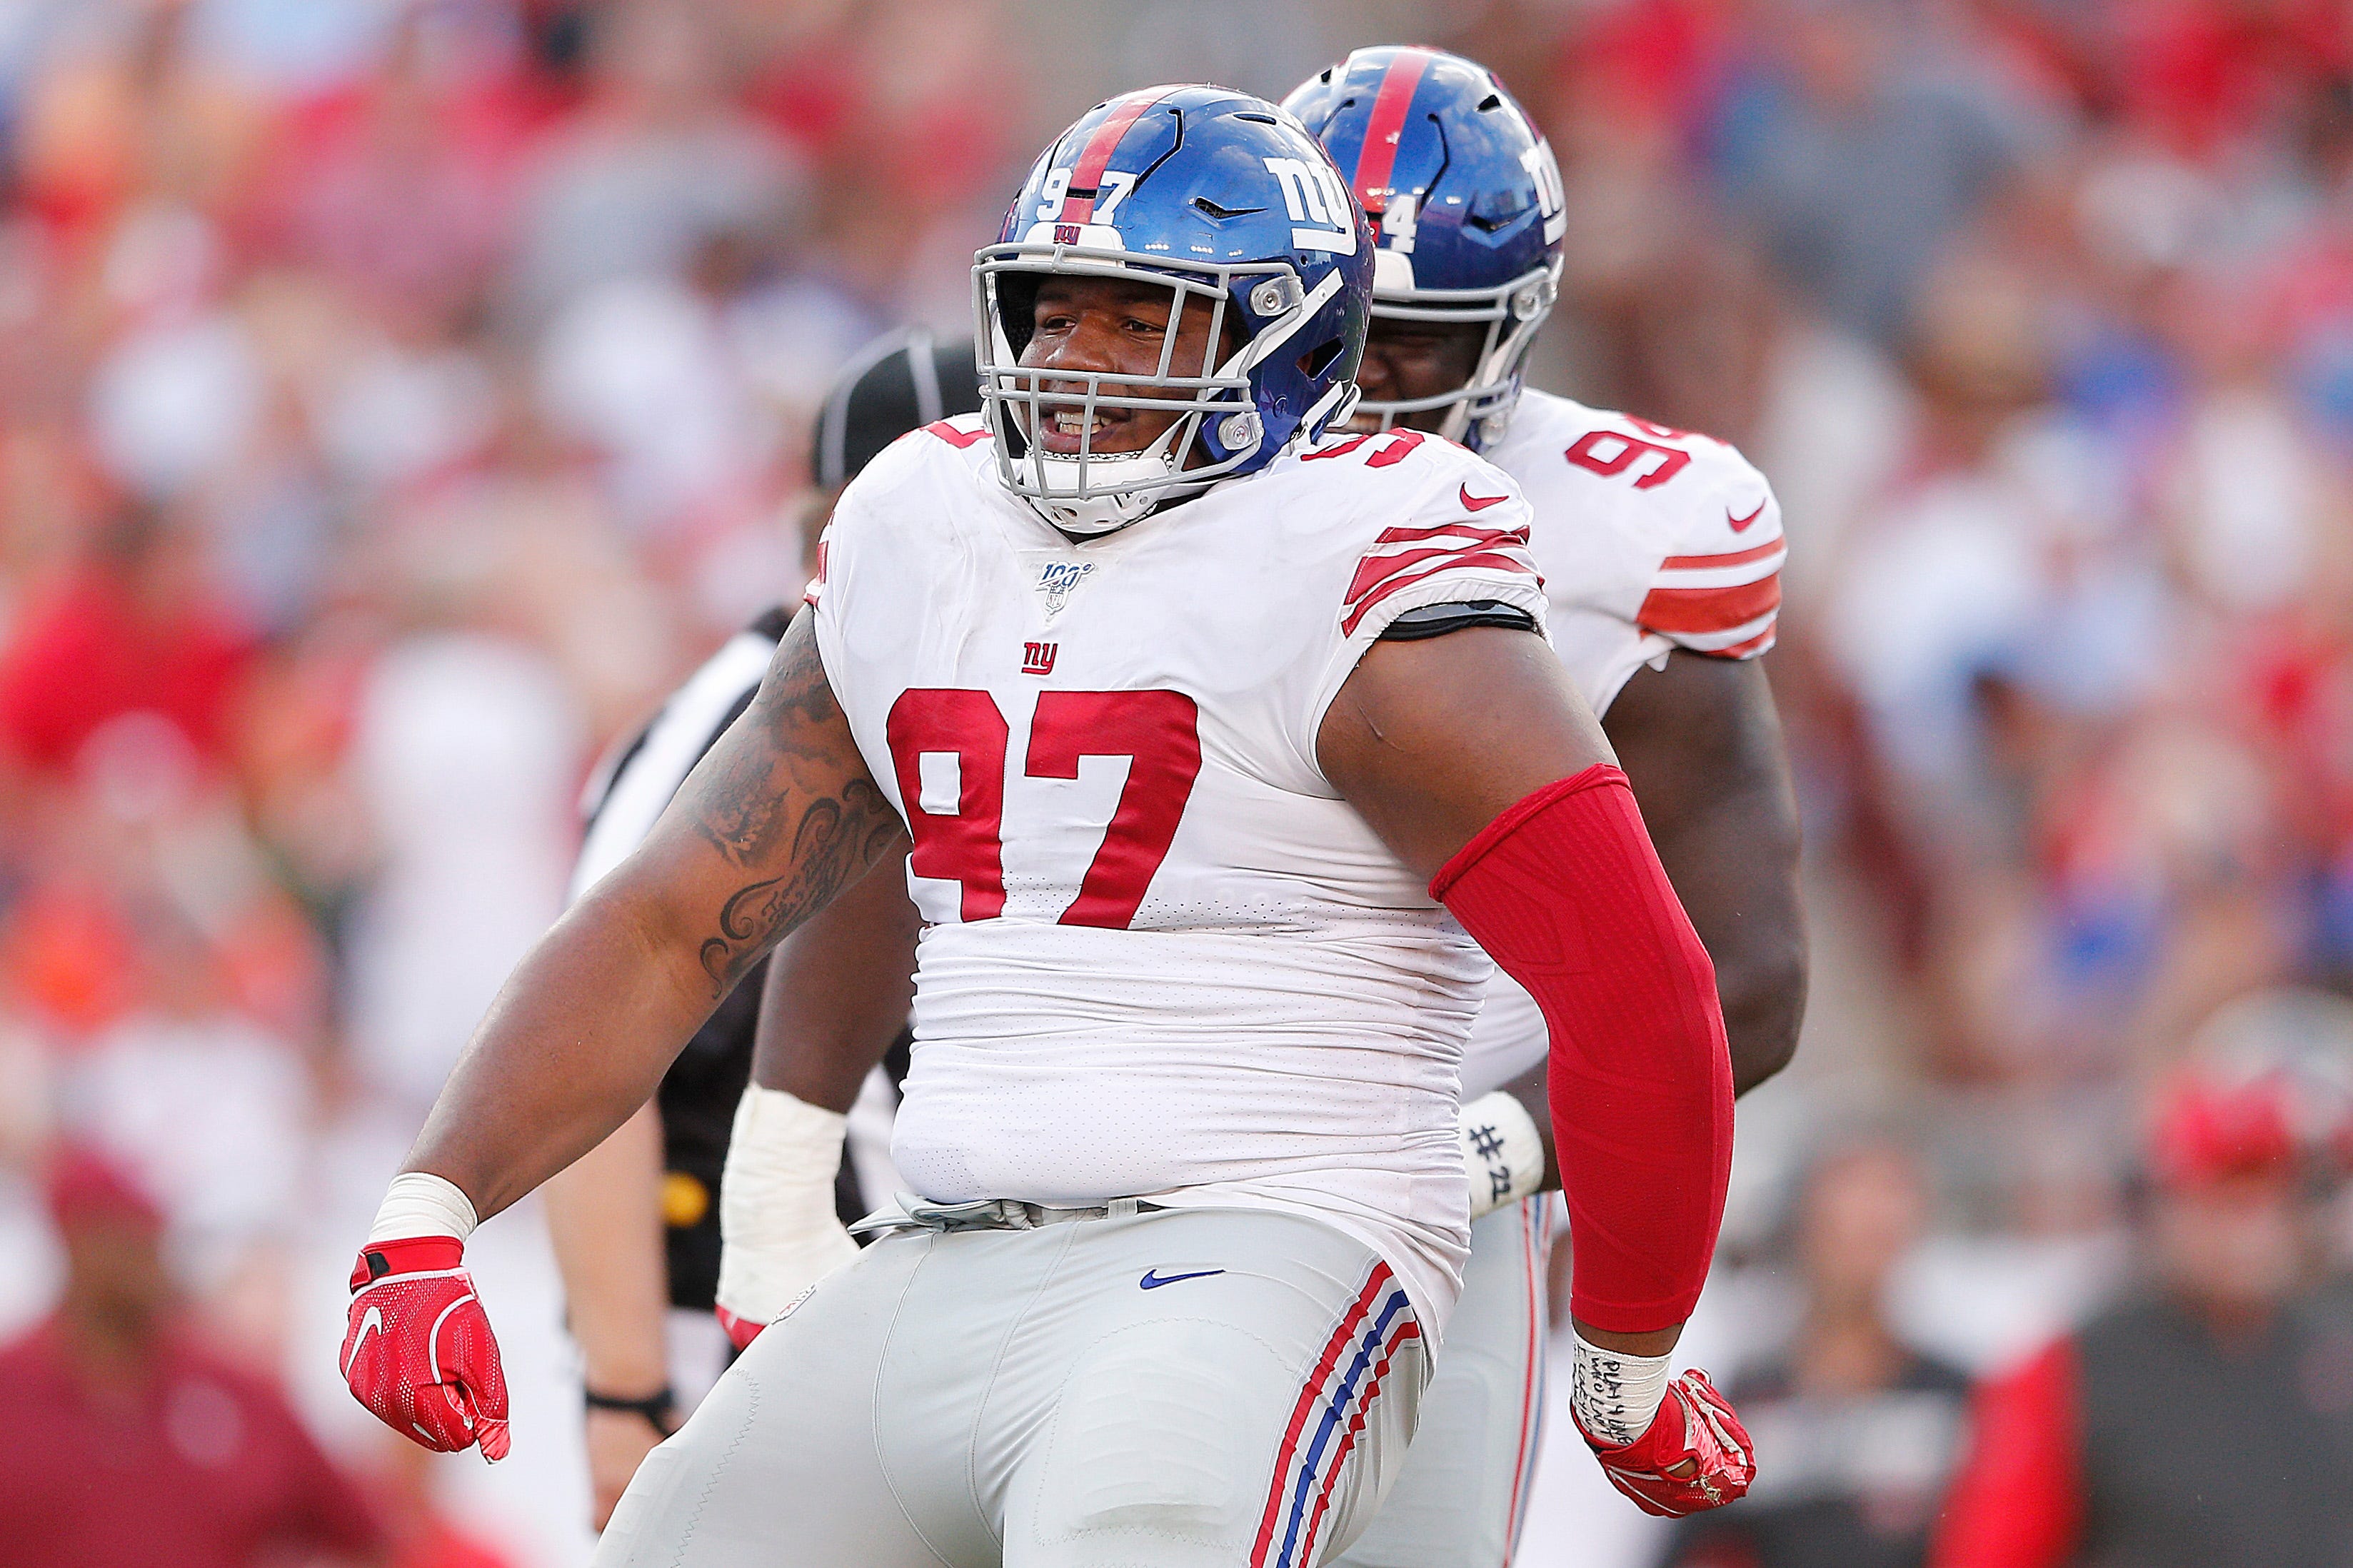 Dexter Lawrence: 3 reasons why rookie 